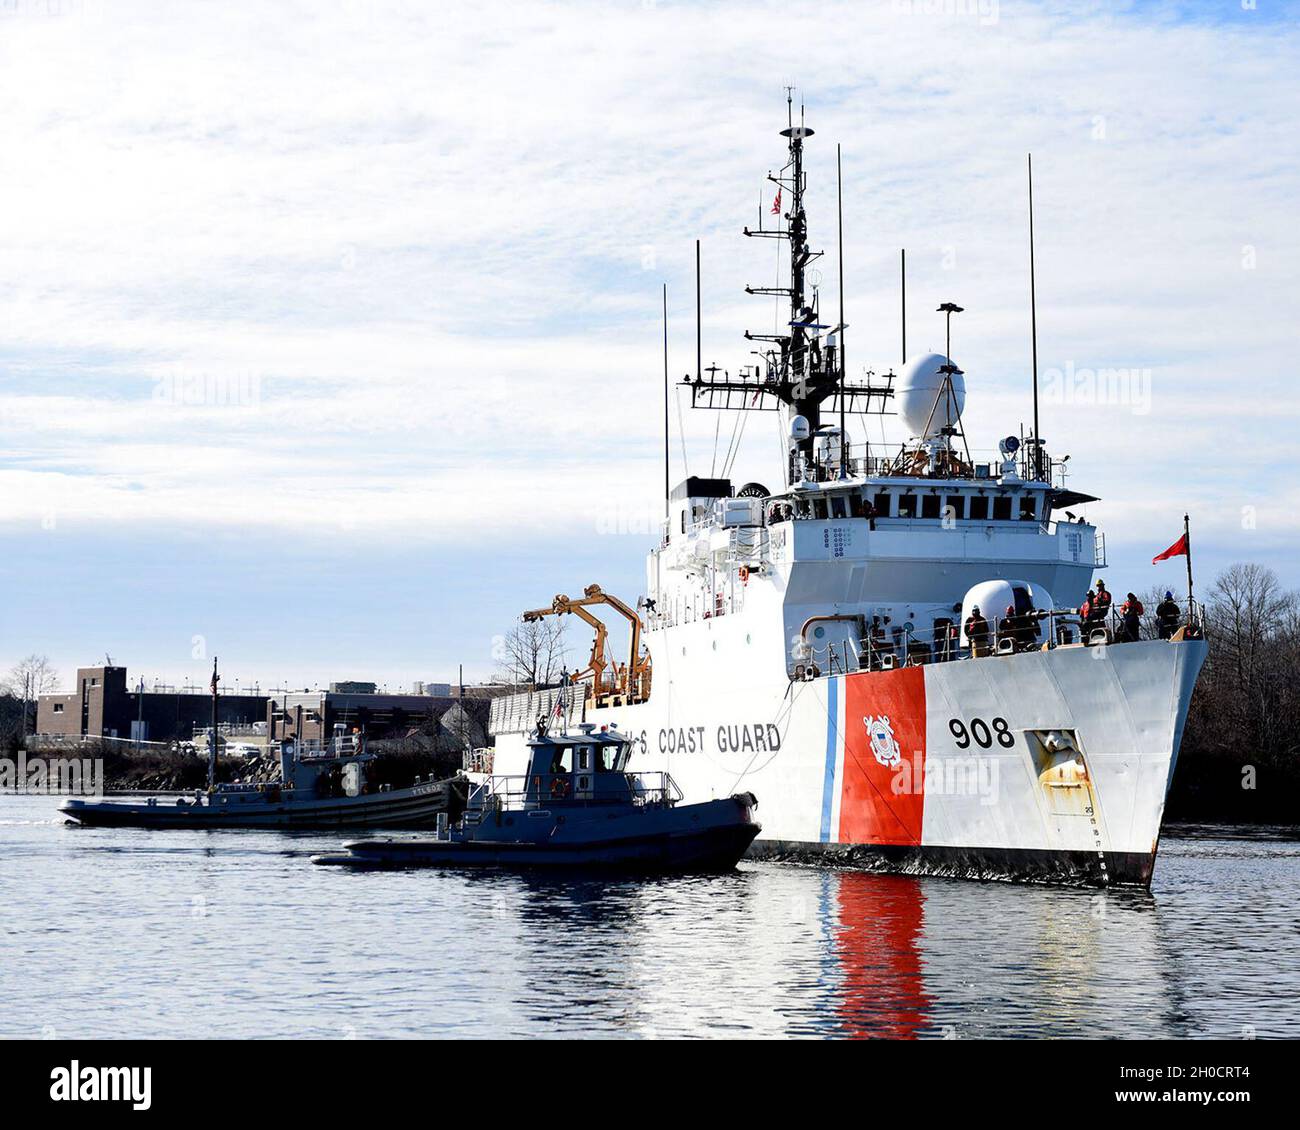 The U.S. Coast Guard Cutter Tahoma (WMEC 908) crew prepares to moor at  their homeport in Kittery, Maine, January 26, 2020. The crew conducted 28  at-sea law enforcement boardings and responded to